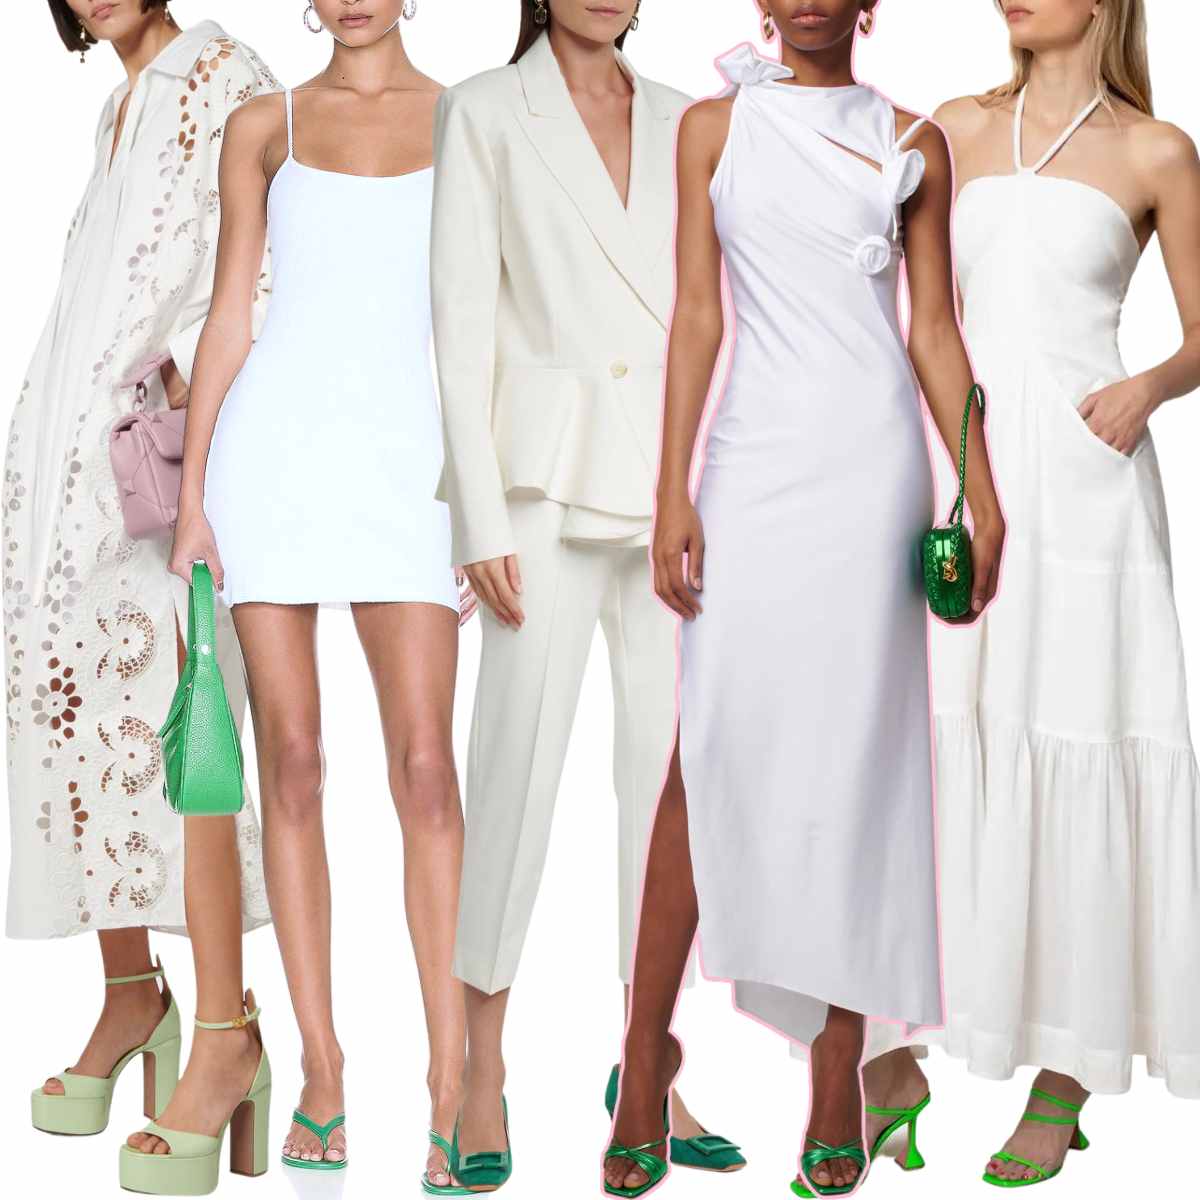 Collage of 5 women wearing different green shoes outfits with white clothing.